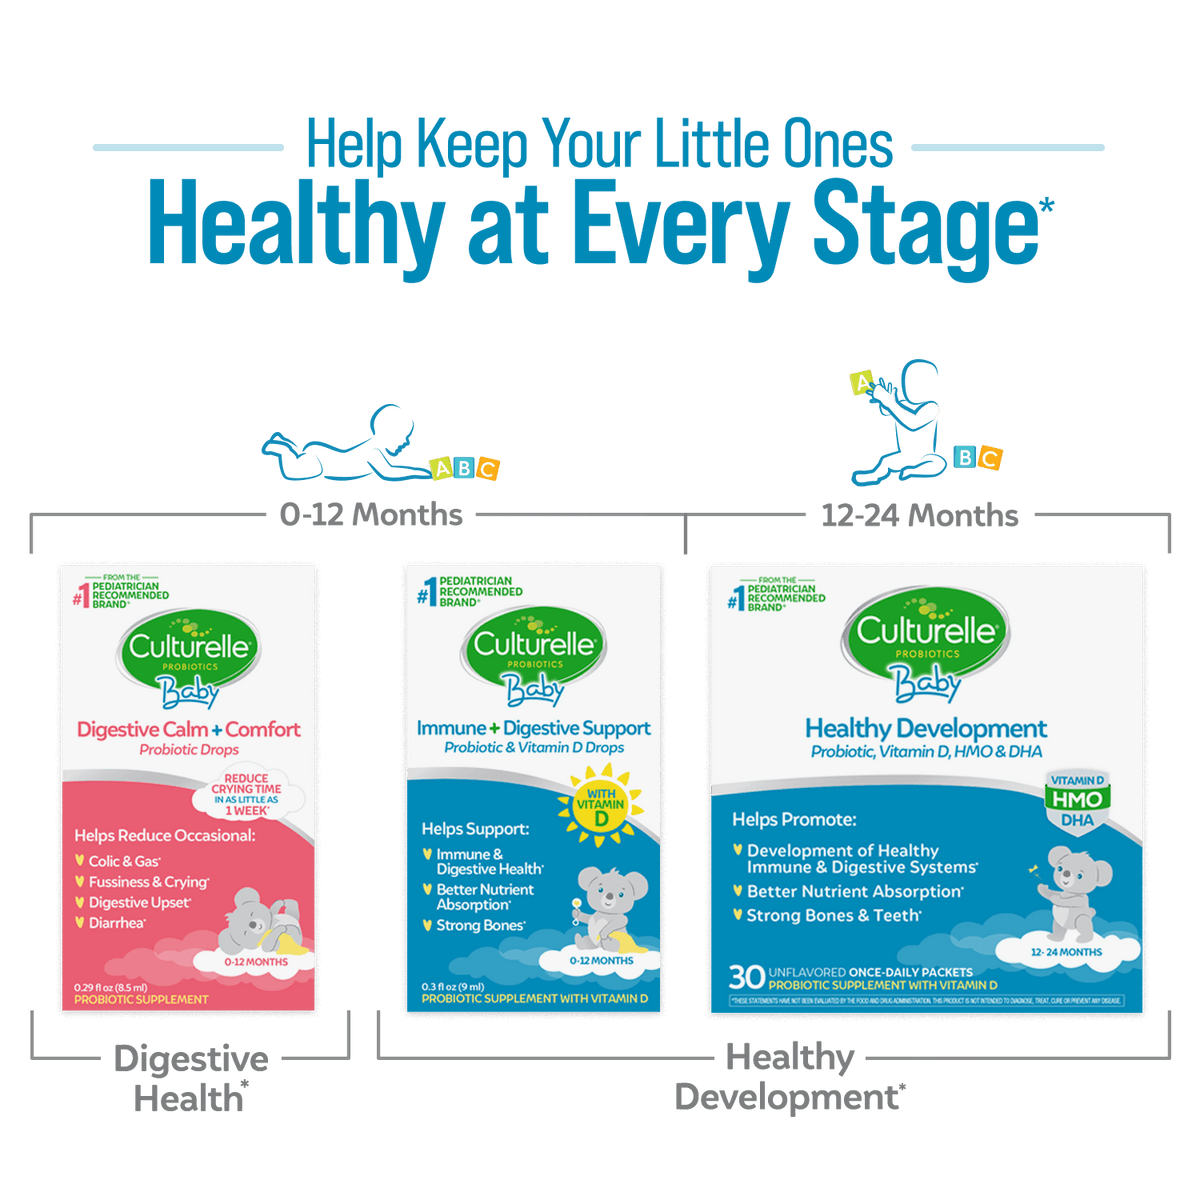 help keep your little ones healthy at every stage. 0-12 months use digestive calm + comfort and immune digestive support. 12-24 months use Culturelle baby healthy development packets